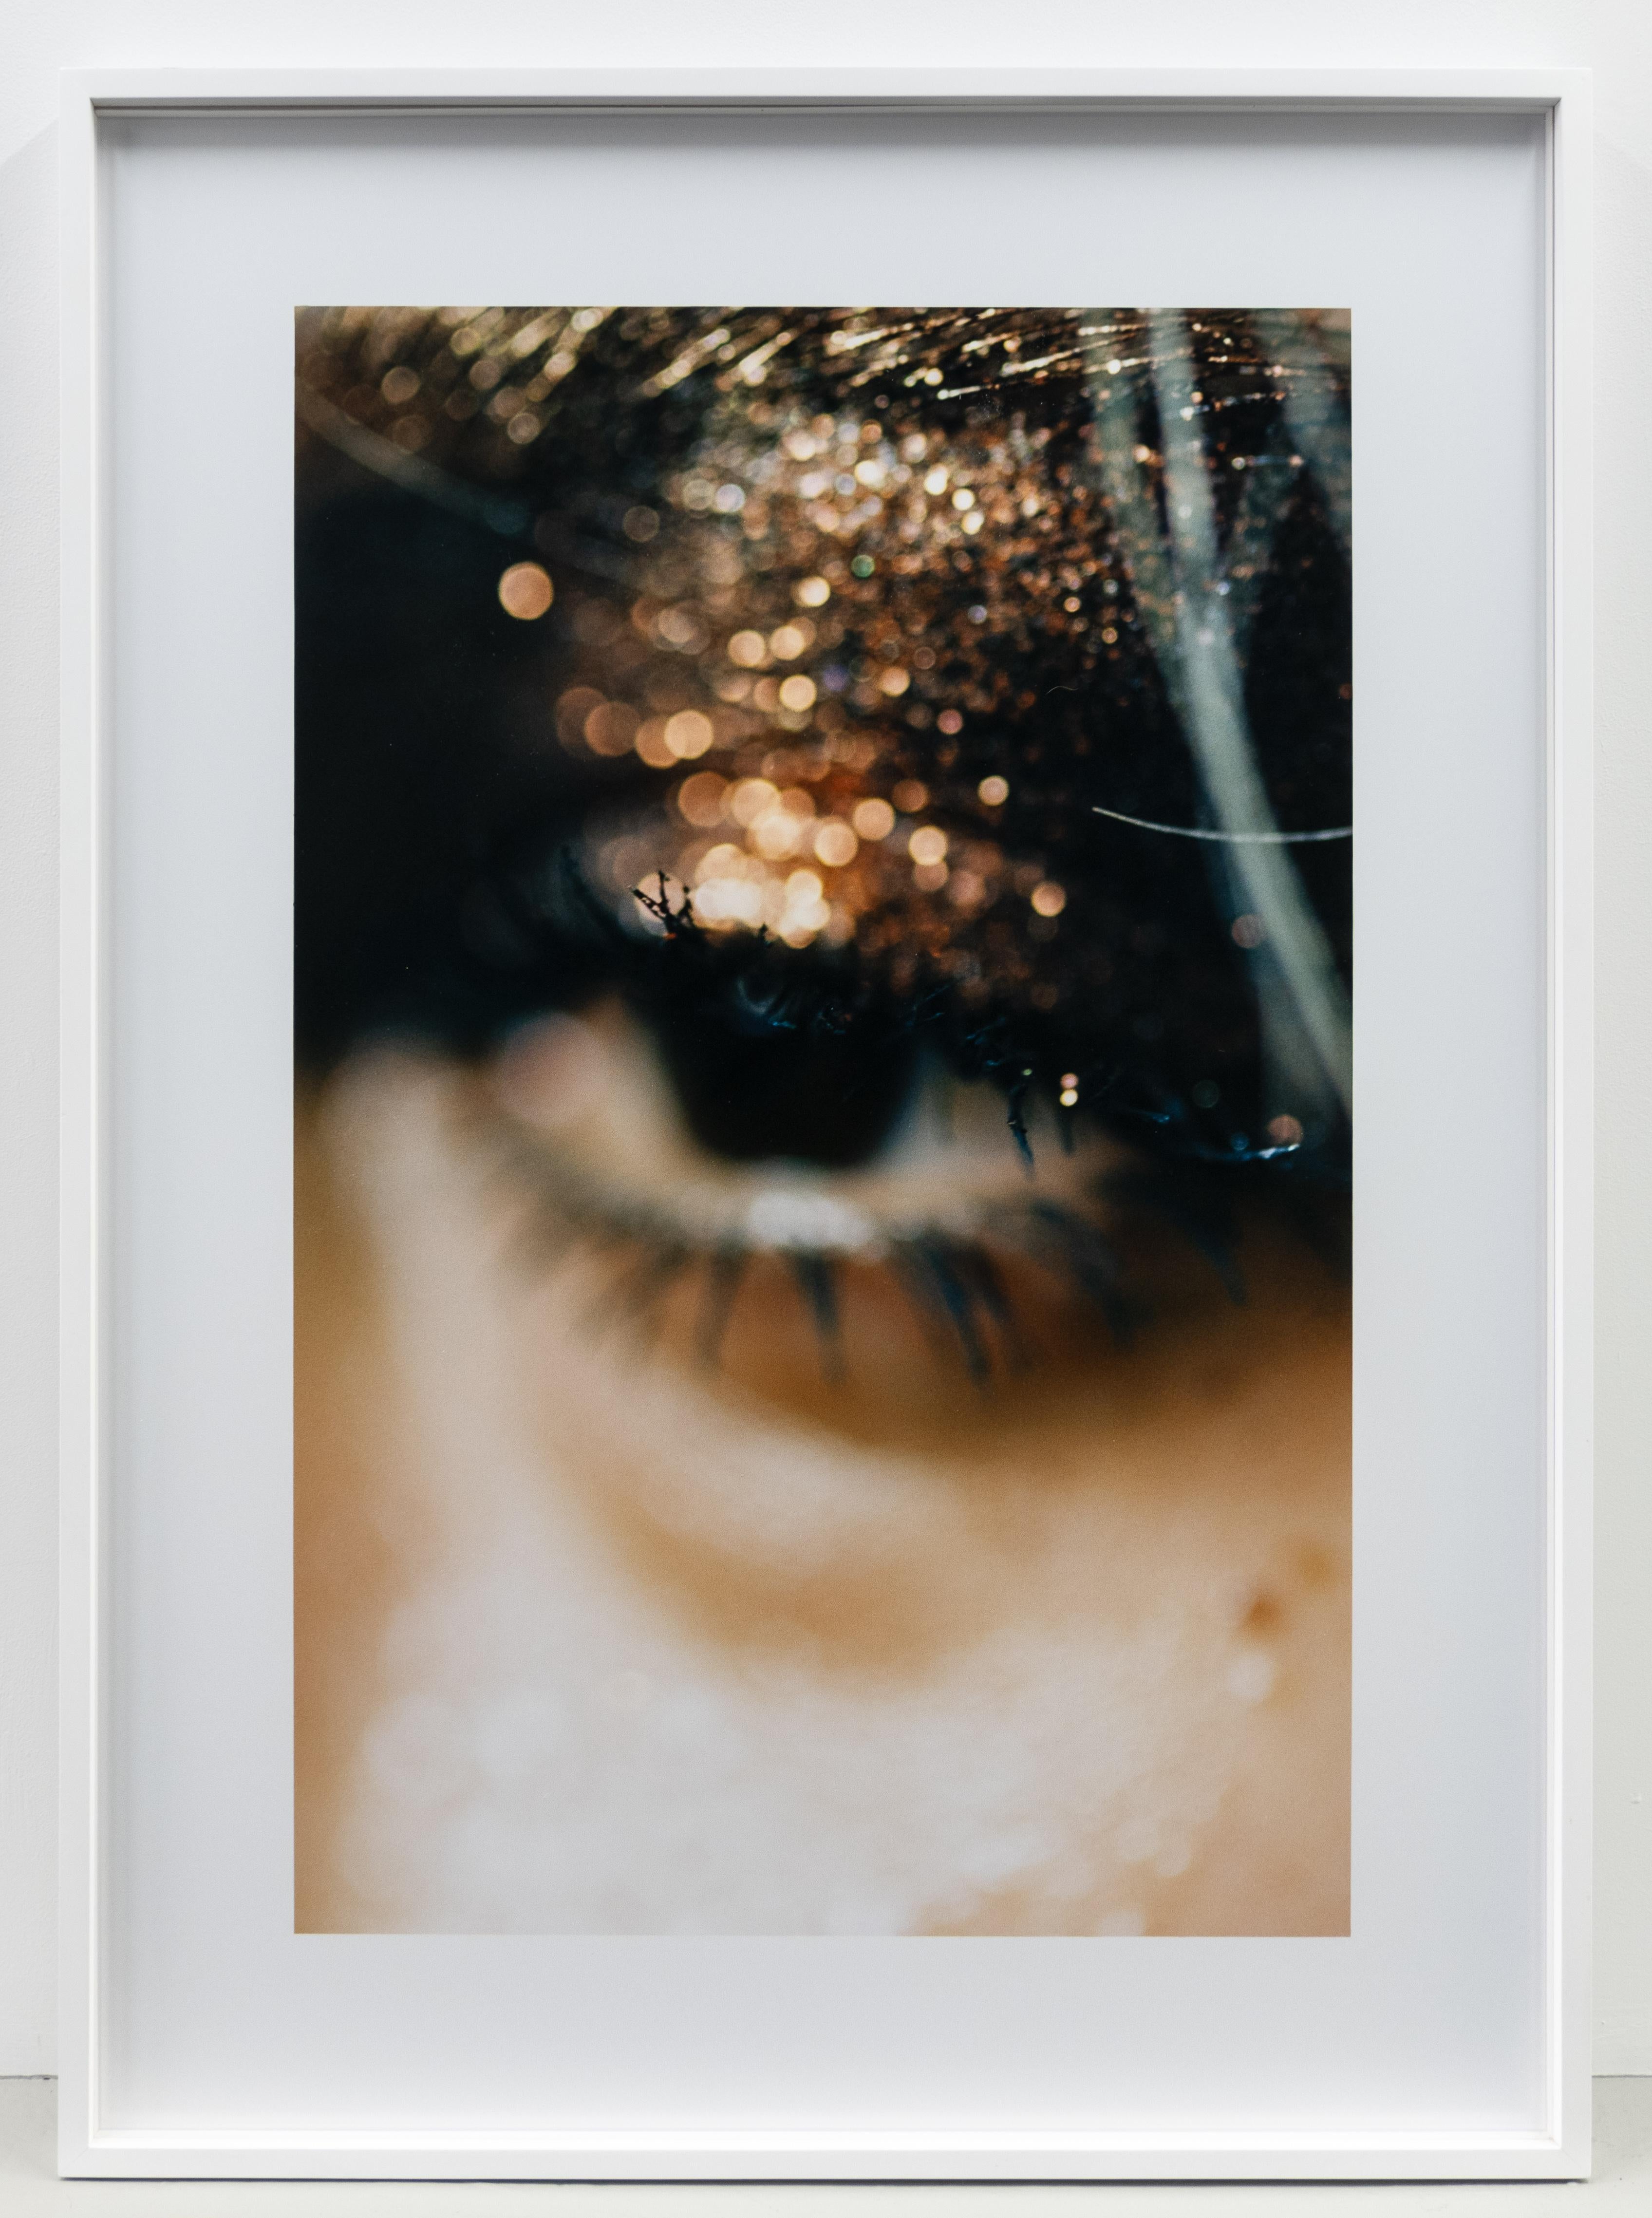 Brown-Eyed Girl - Photograph by Marilyn Minter